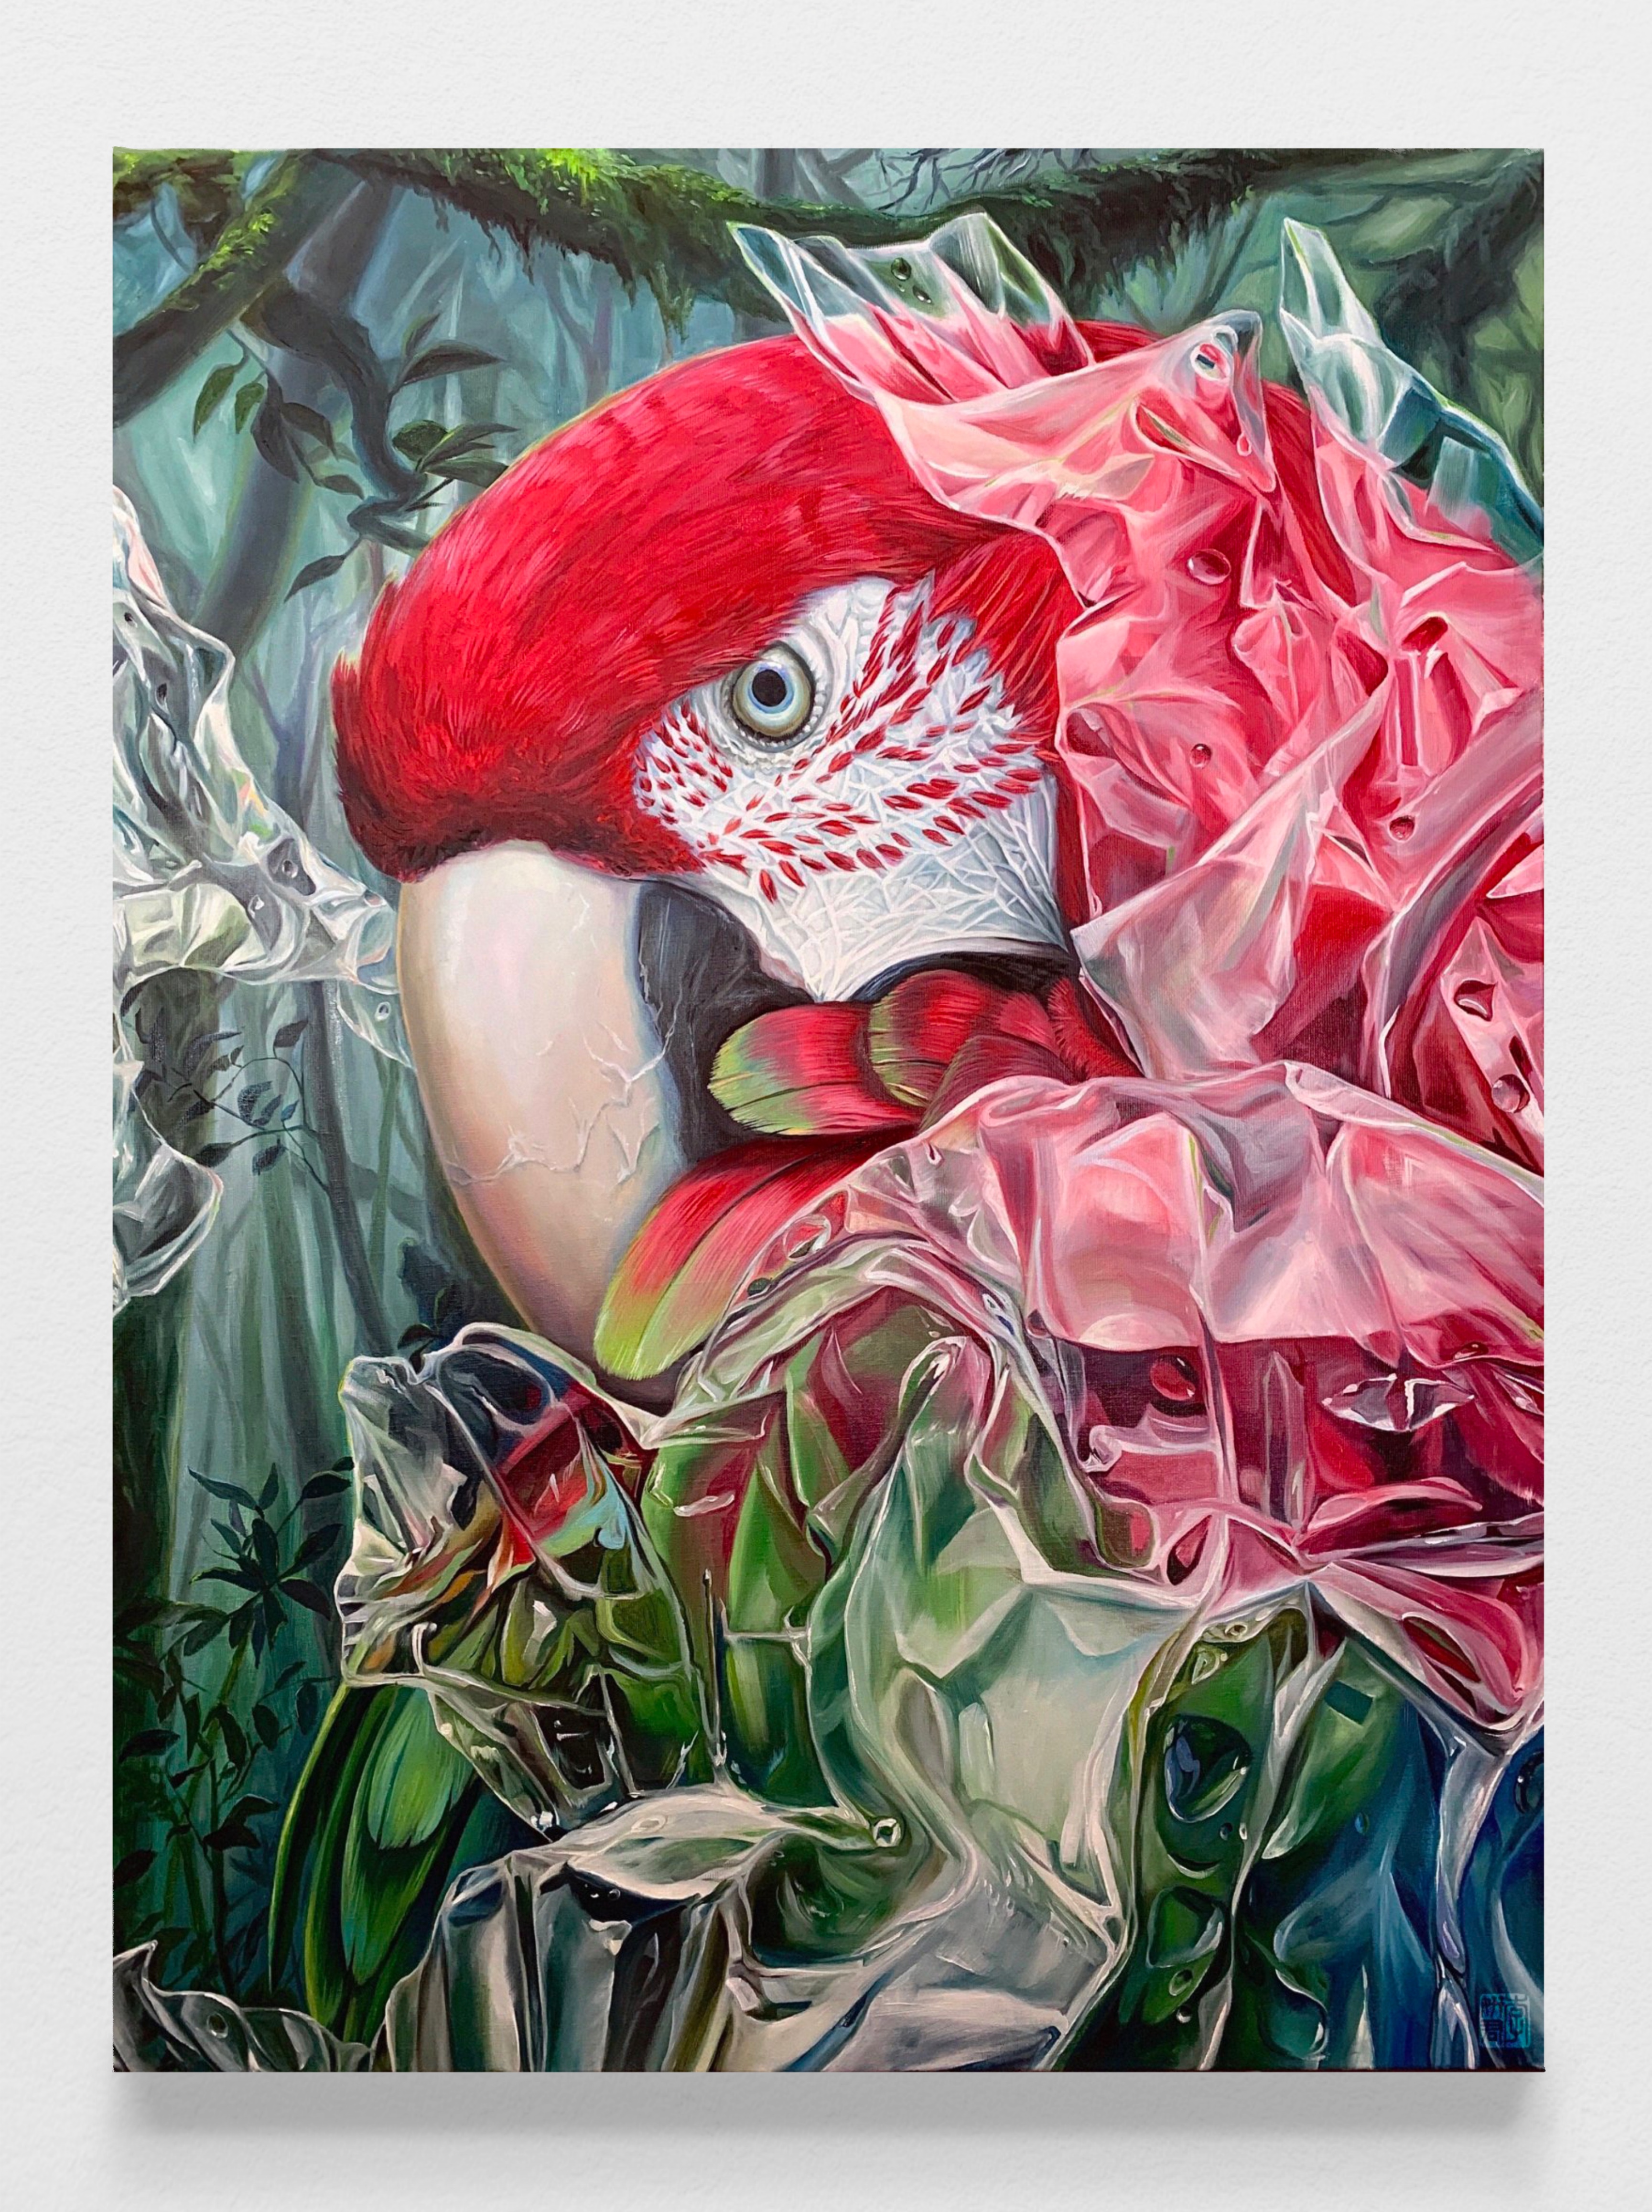 Parrot, 2020, 30x40 inches, oil on linen